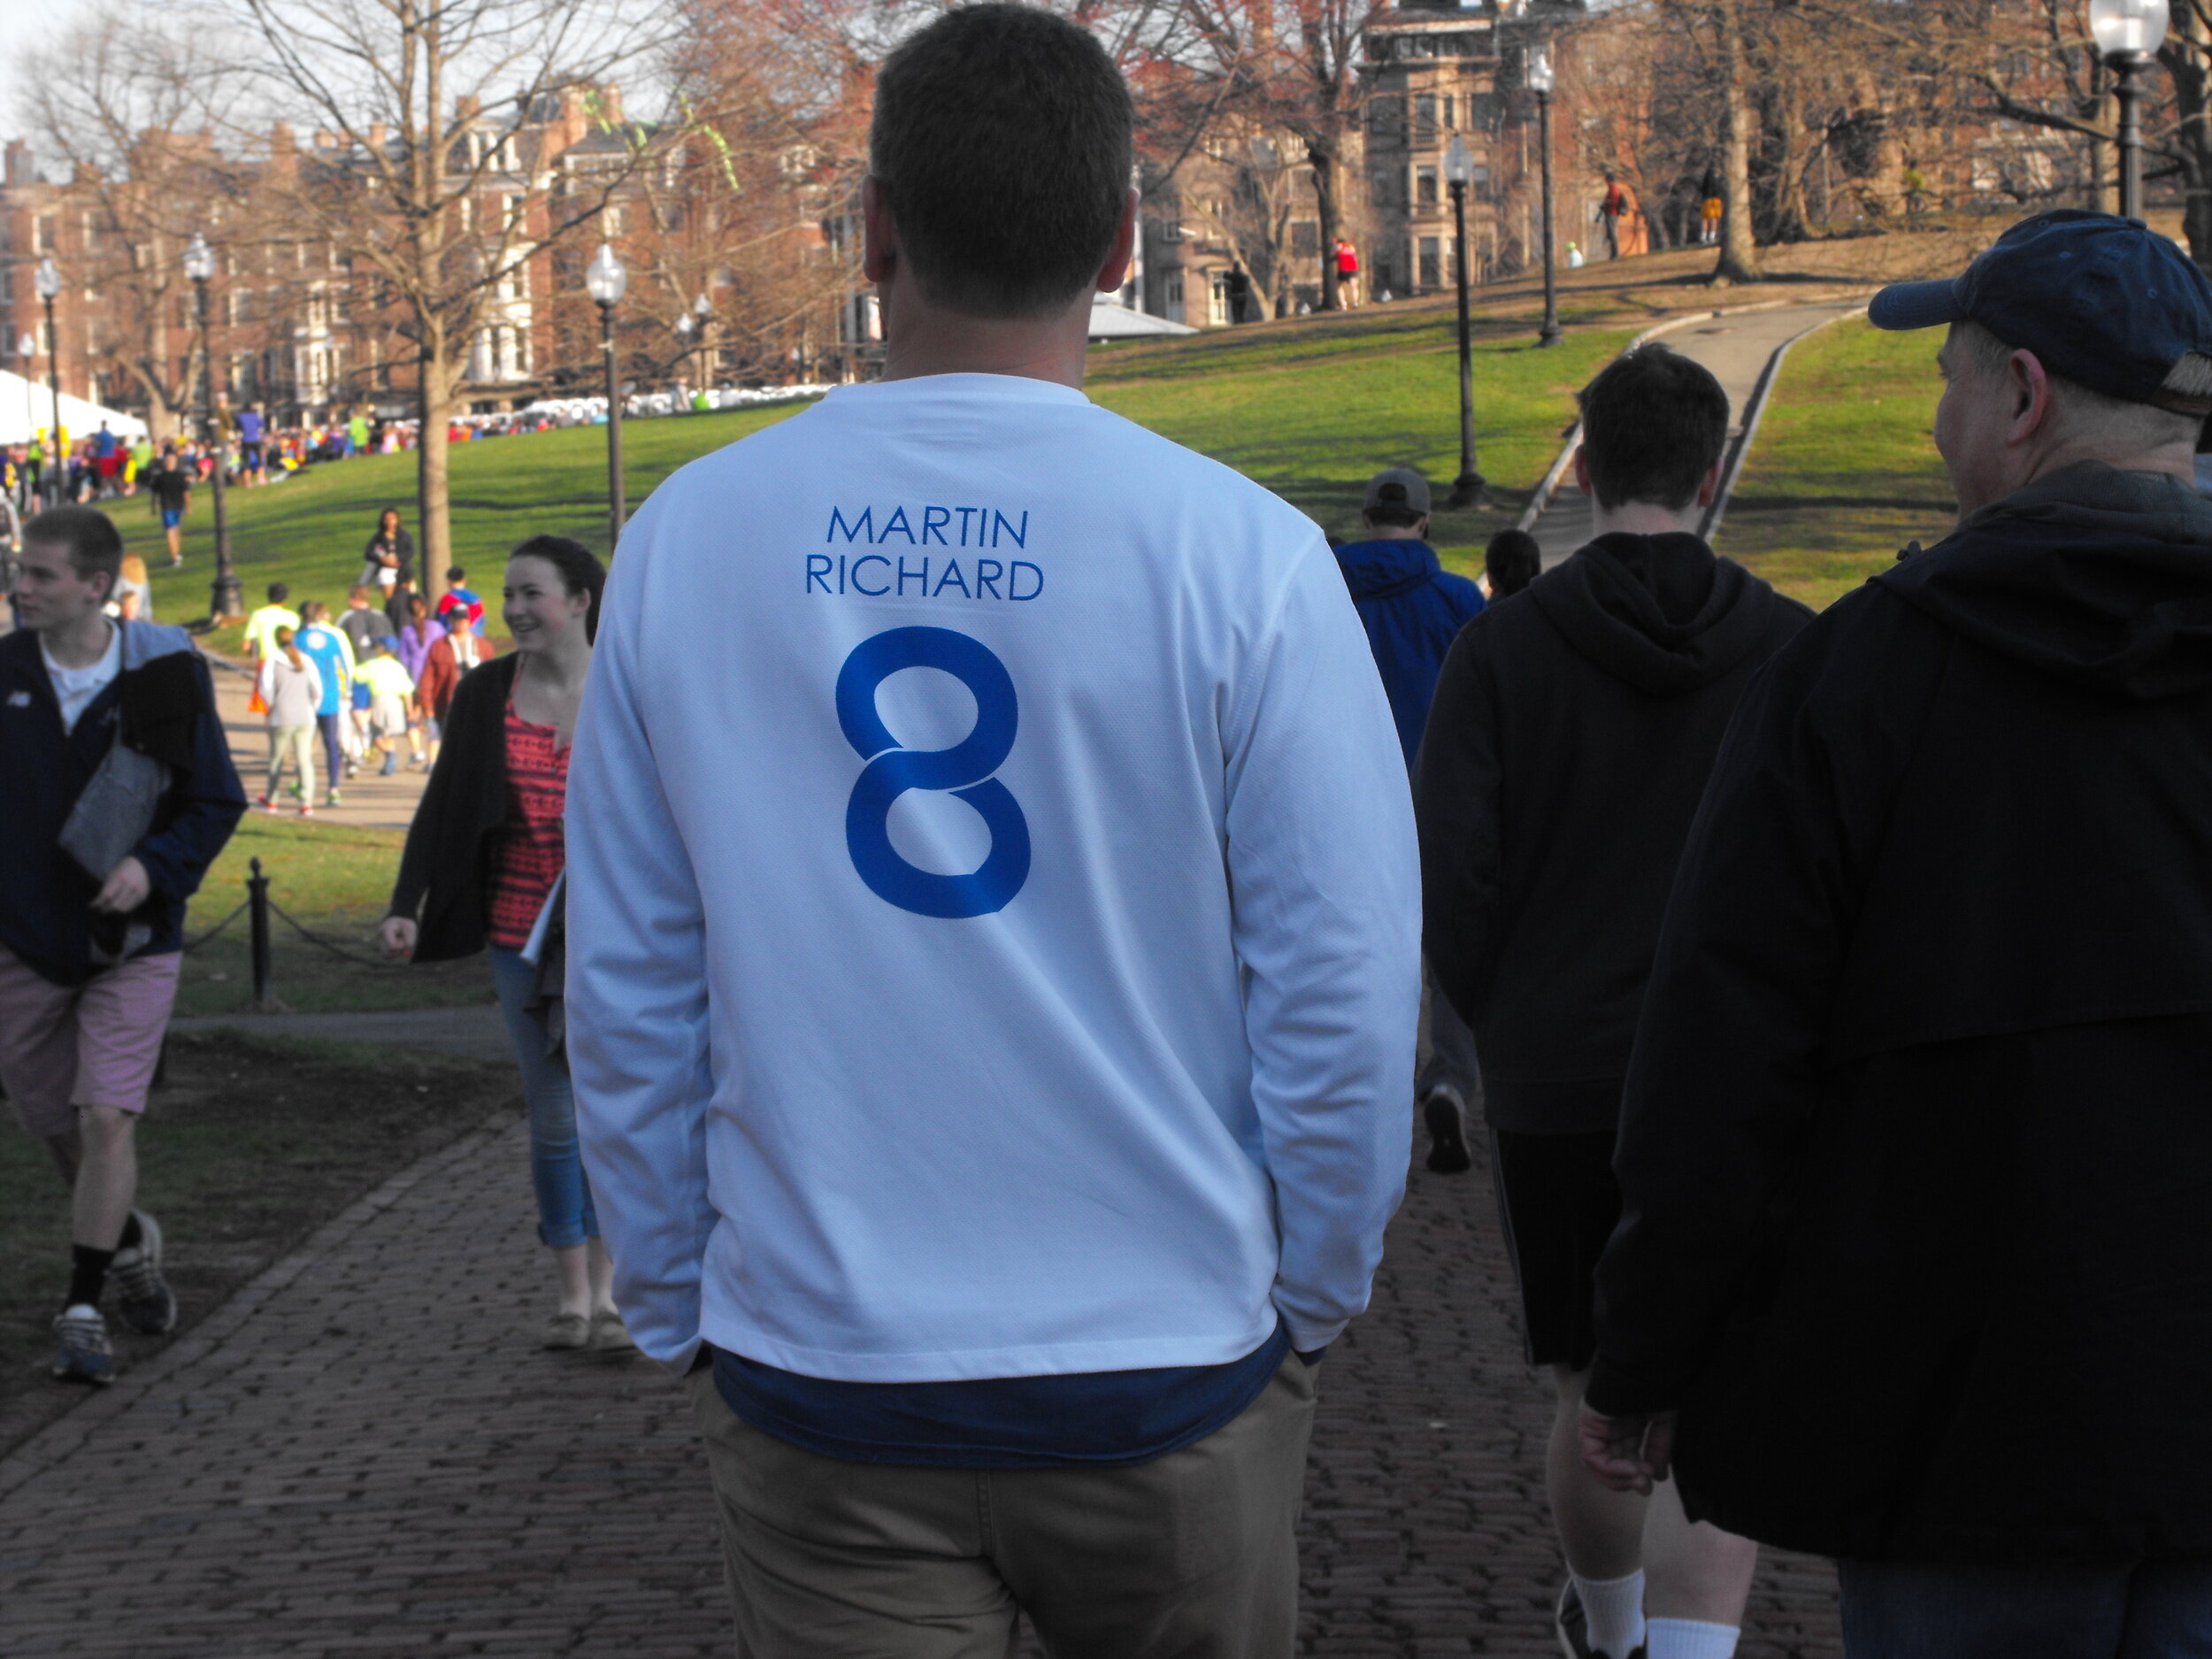  Boston. April 18, 2015. As over 10,000 registered 5k participants quickly make their way towards the starting line, a man dons his Martin Richard 8 shirt, paying tribute to the eight-year-old young boy who tragically died in the 2013 marathon bombin